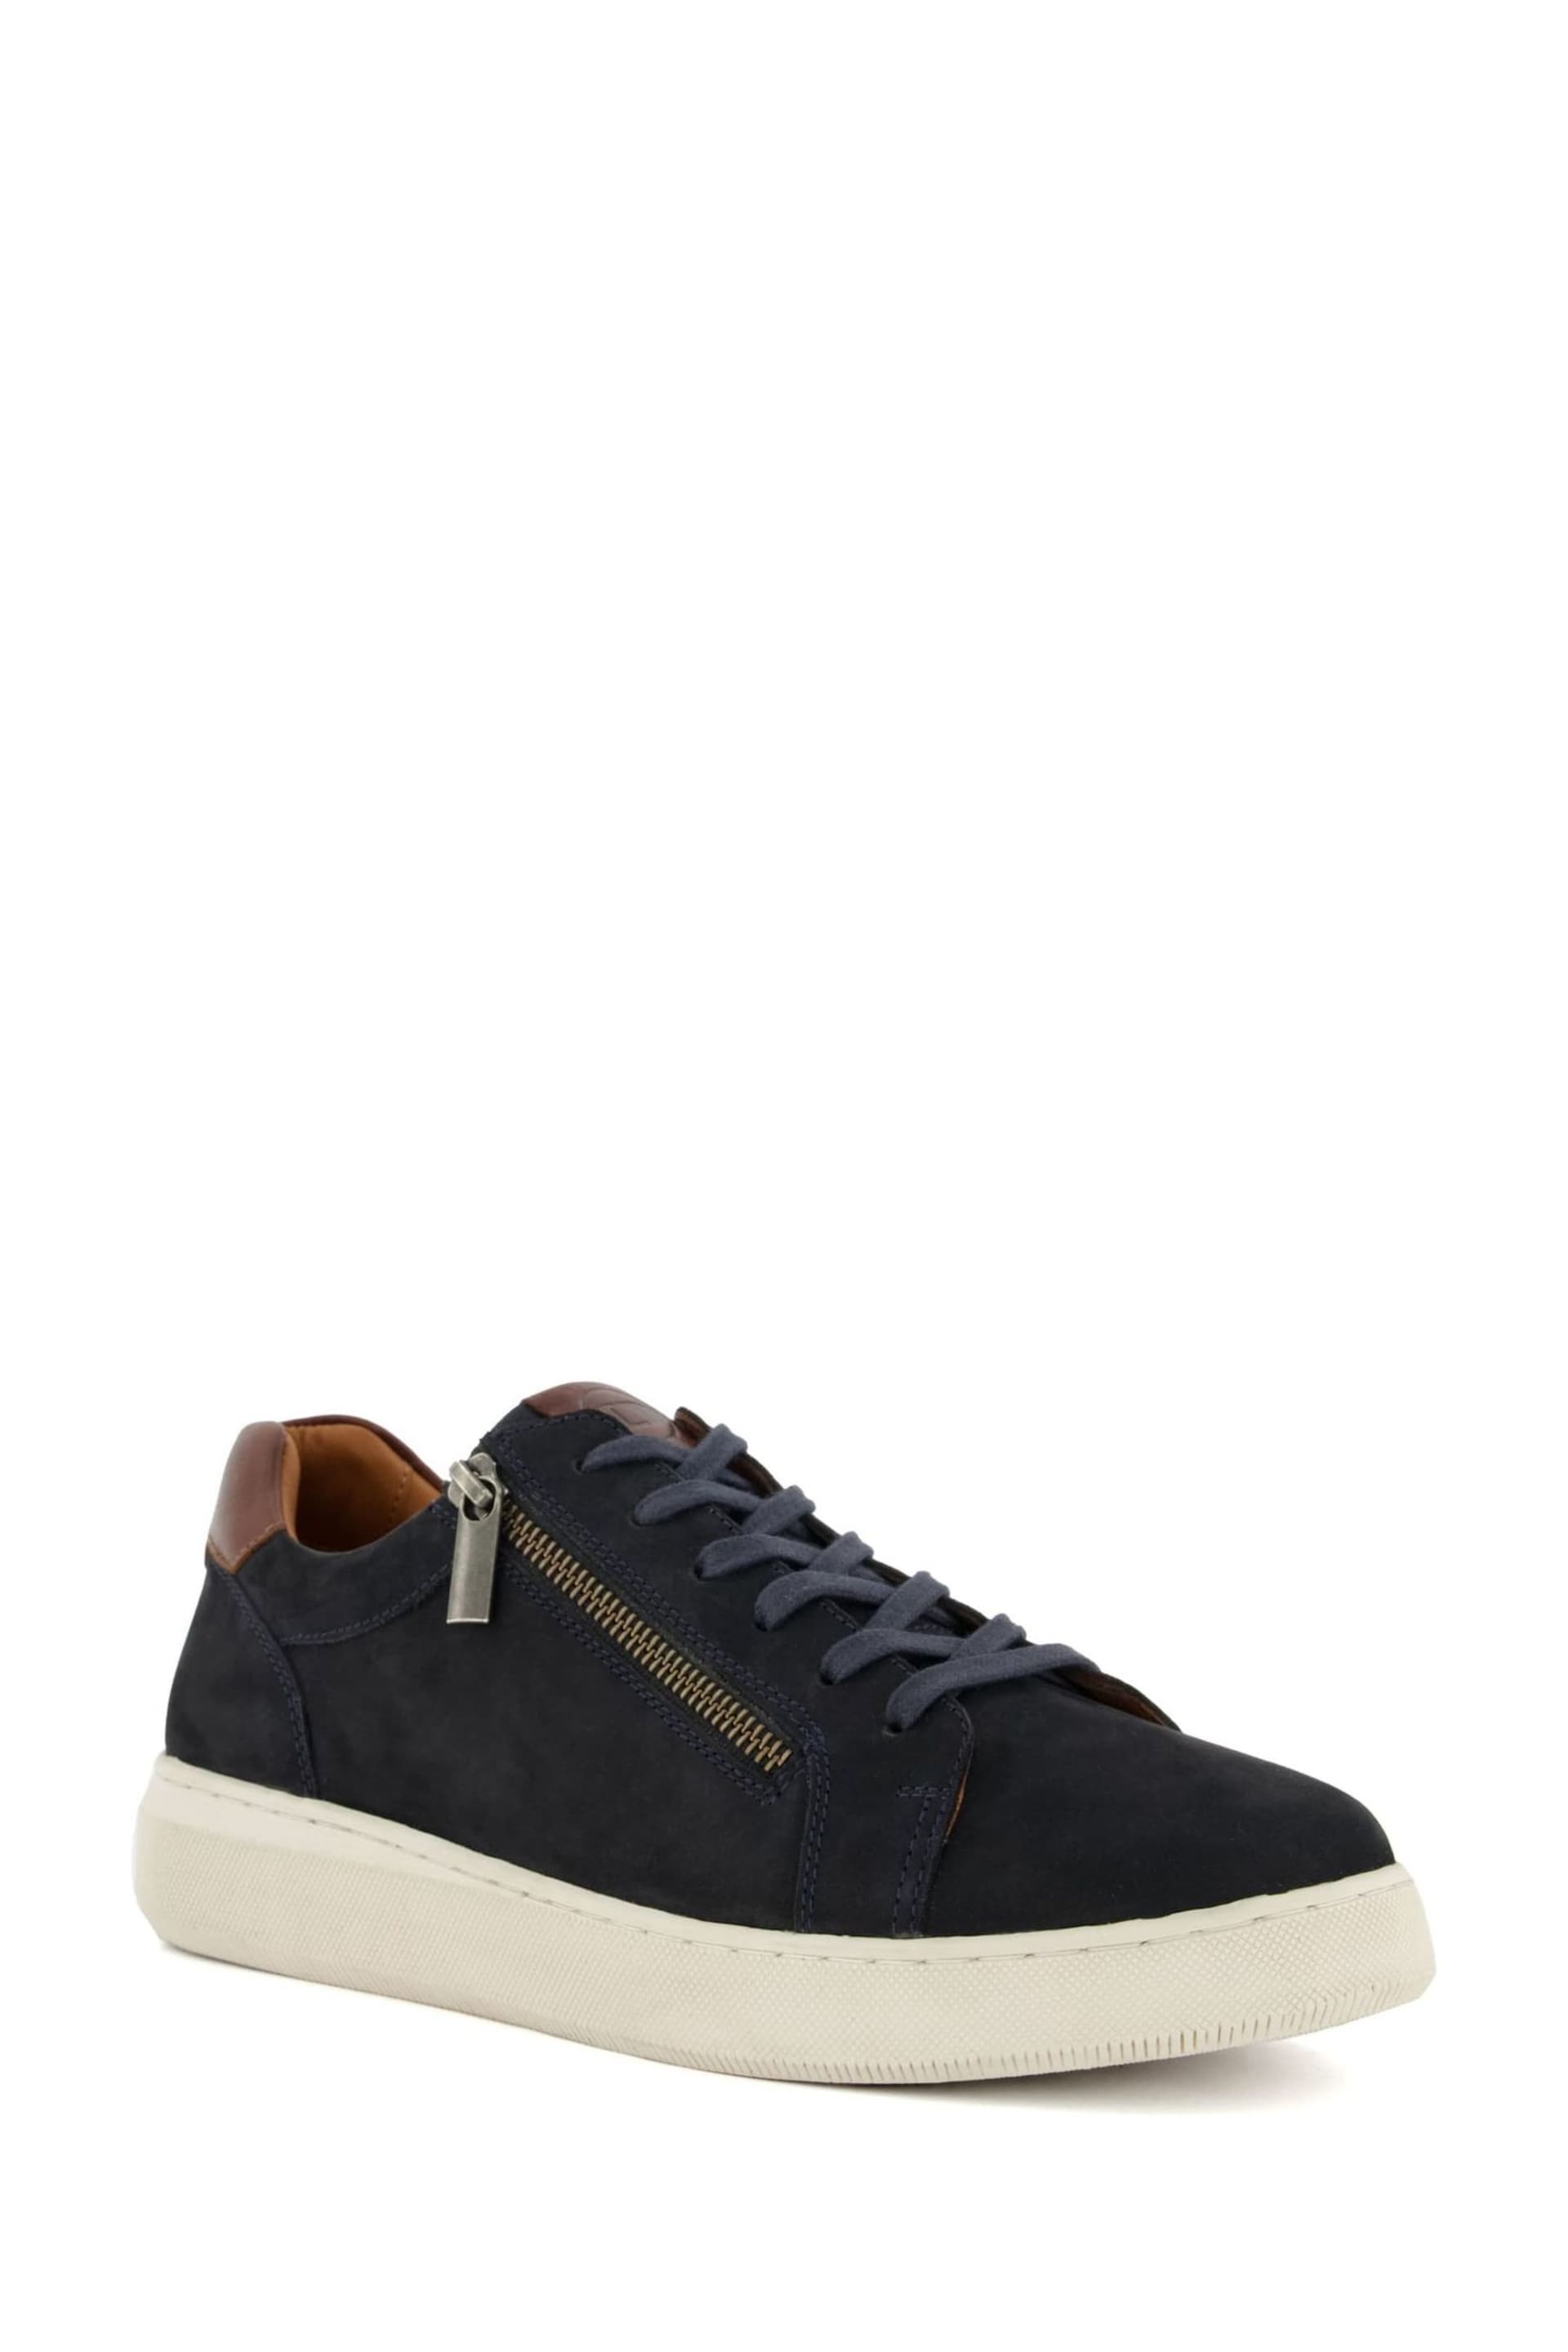 Dune London Blue Tribute Zip Detail Cupsole Trainers - Image 4 of 6